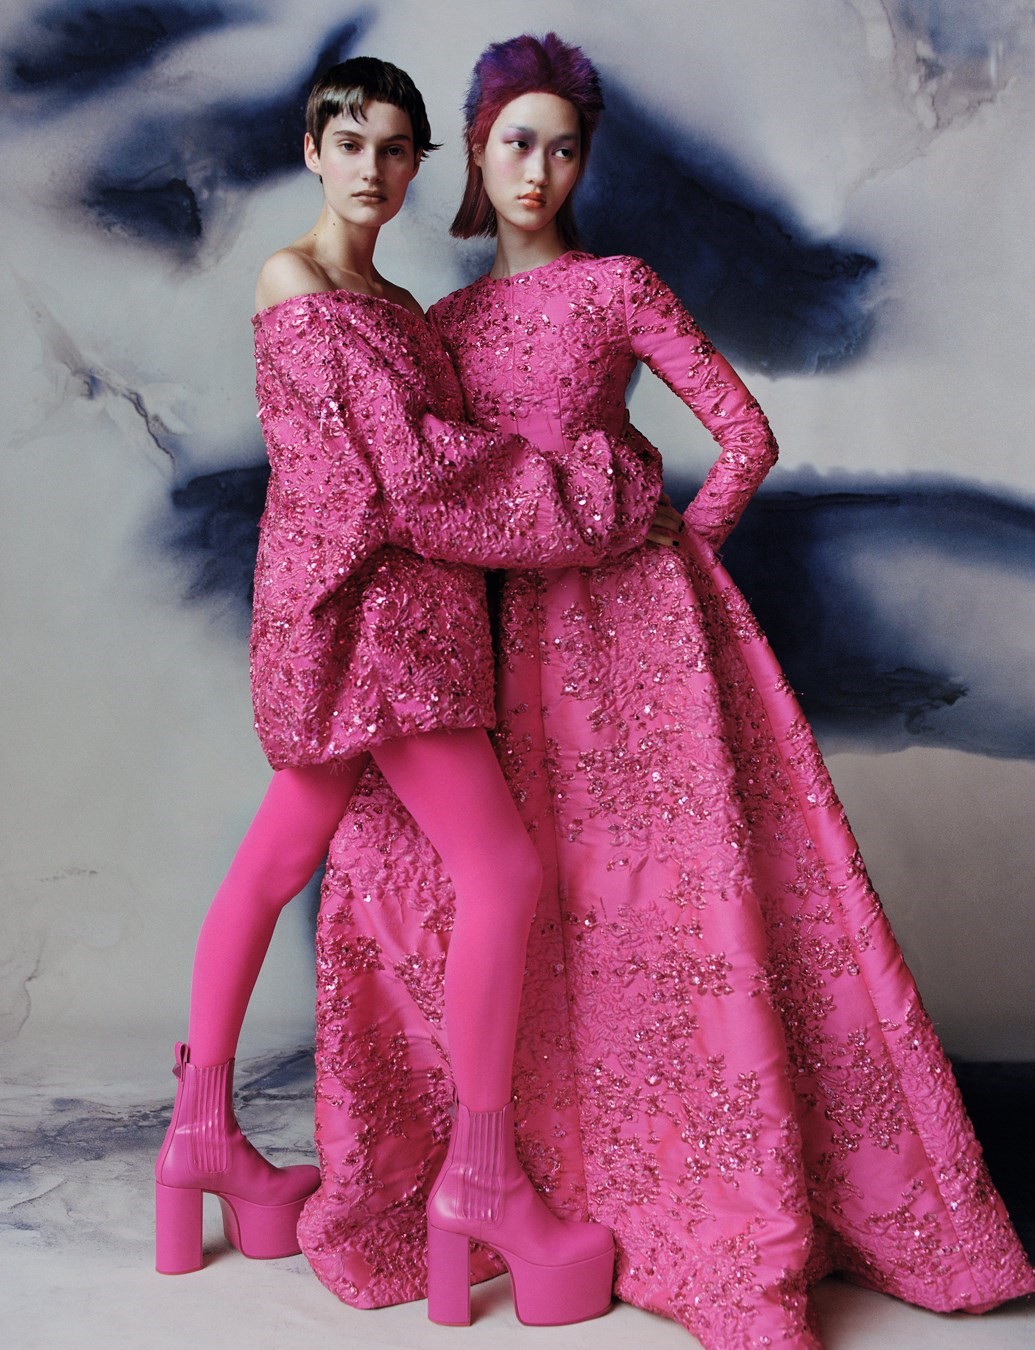 over Udsigt Anonym Pierpaolo Piccioli's Pink Obsession | AnOther